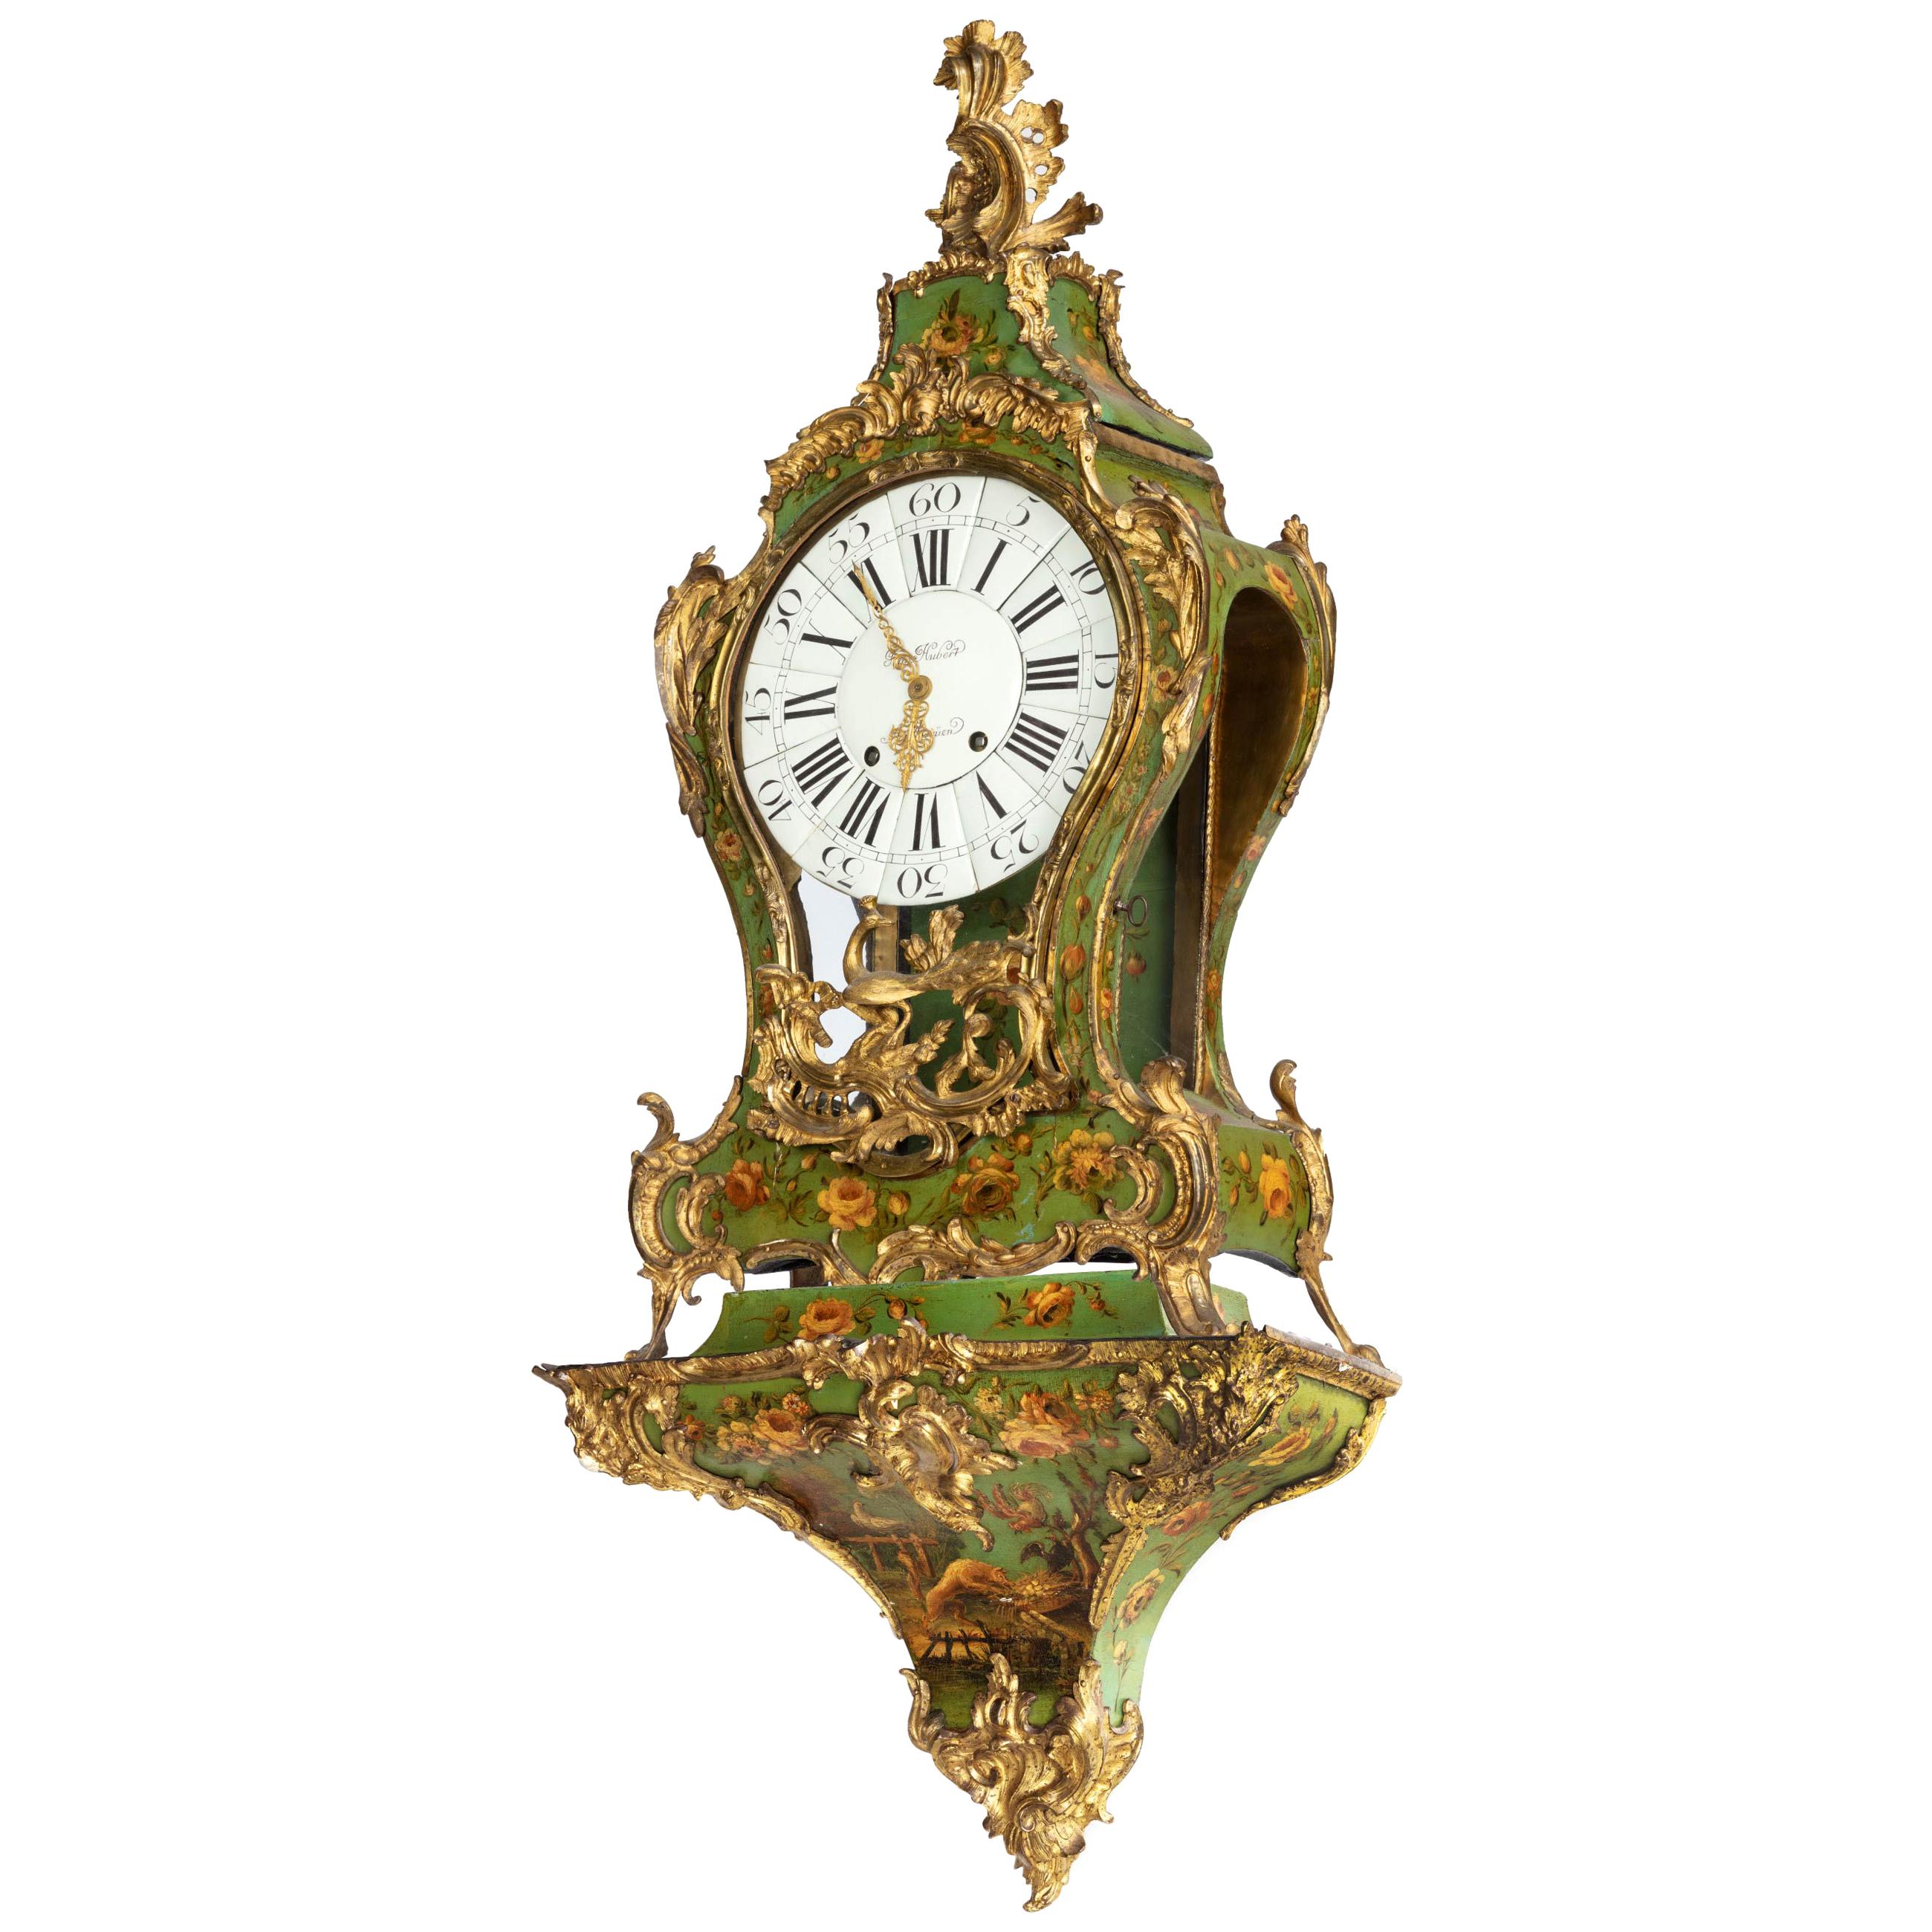 Quite Exceptional 18th Century Cartel Clock by Jean Hubert